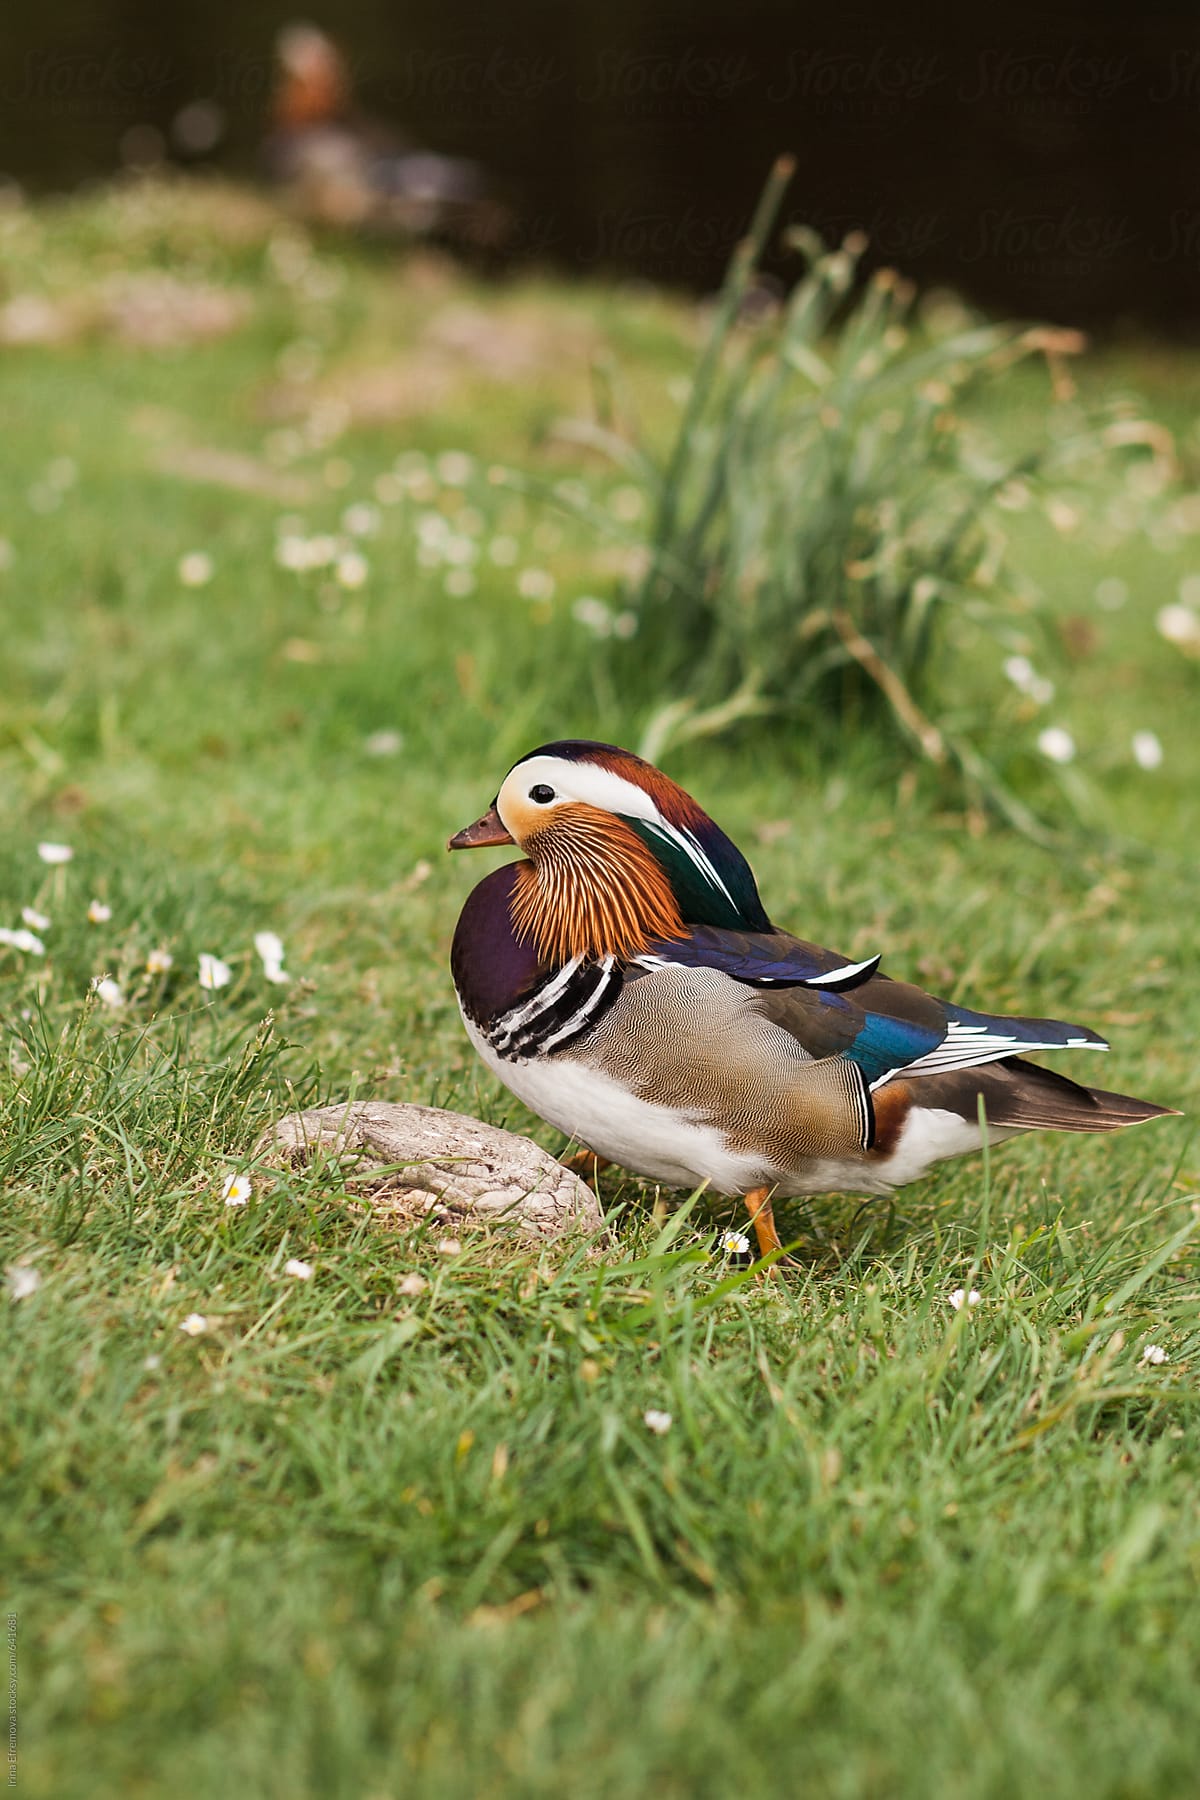 Mandarin duck on the grass in the park